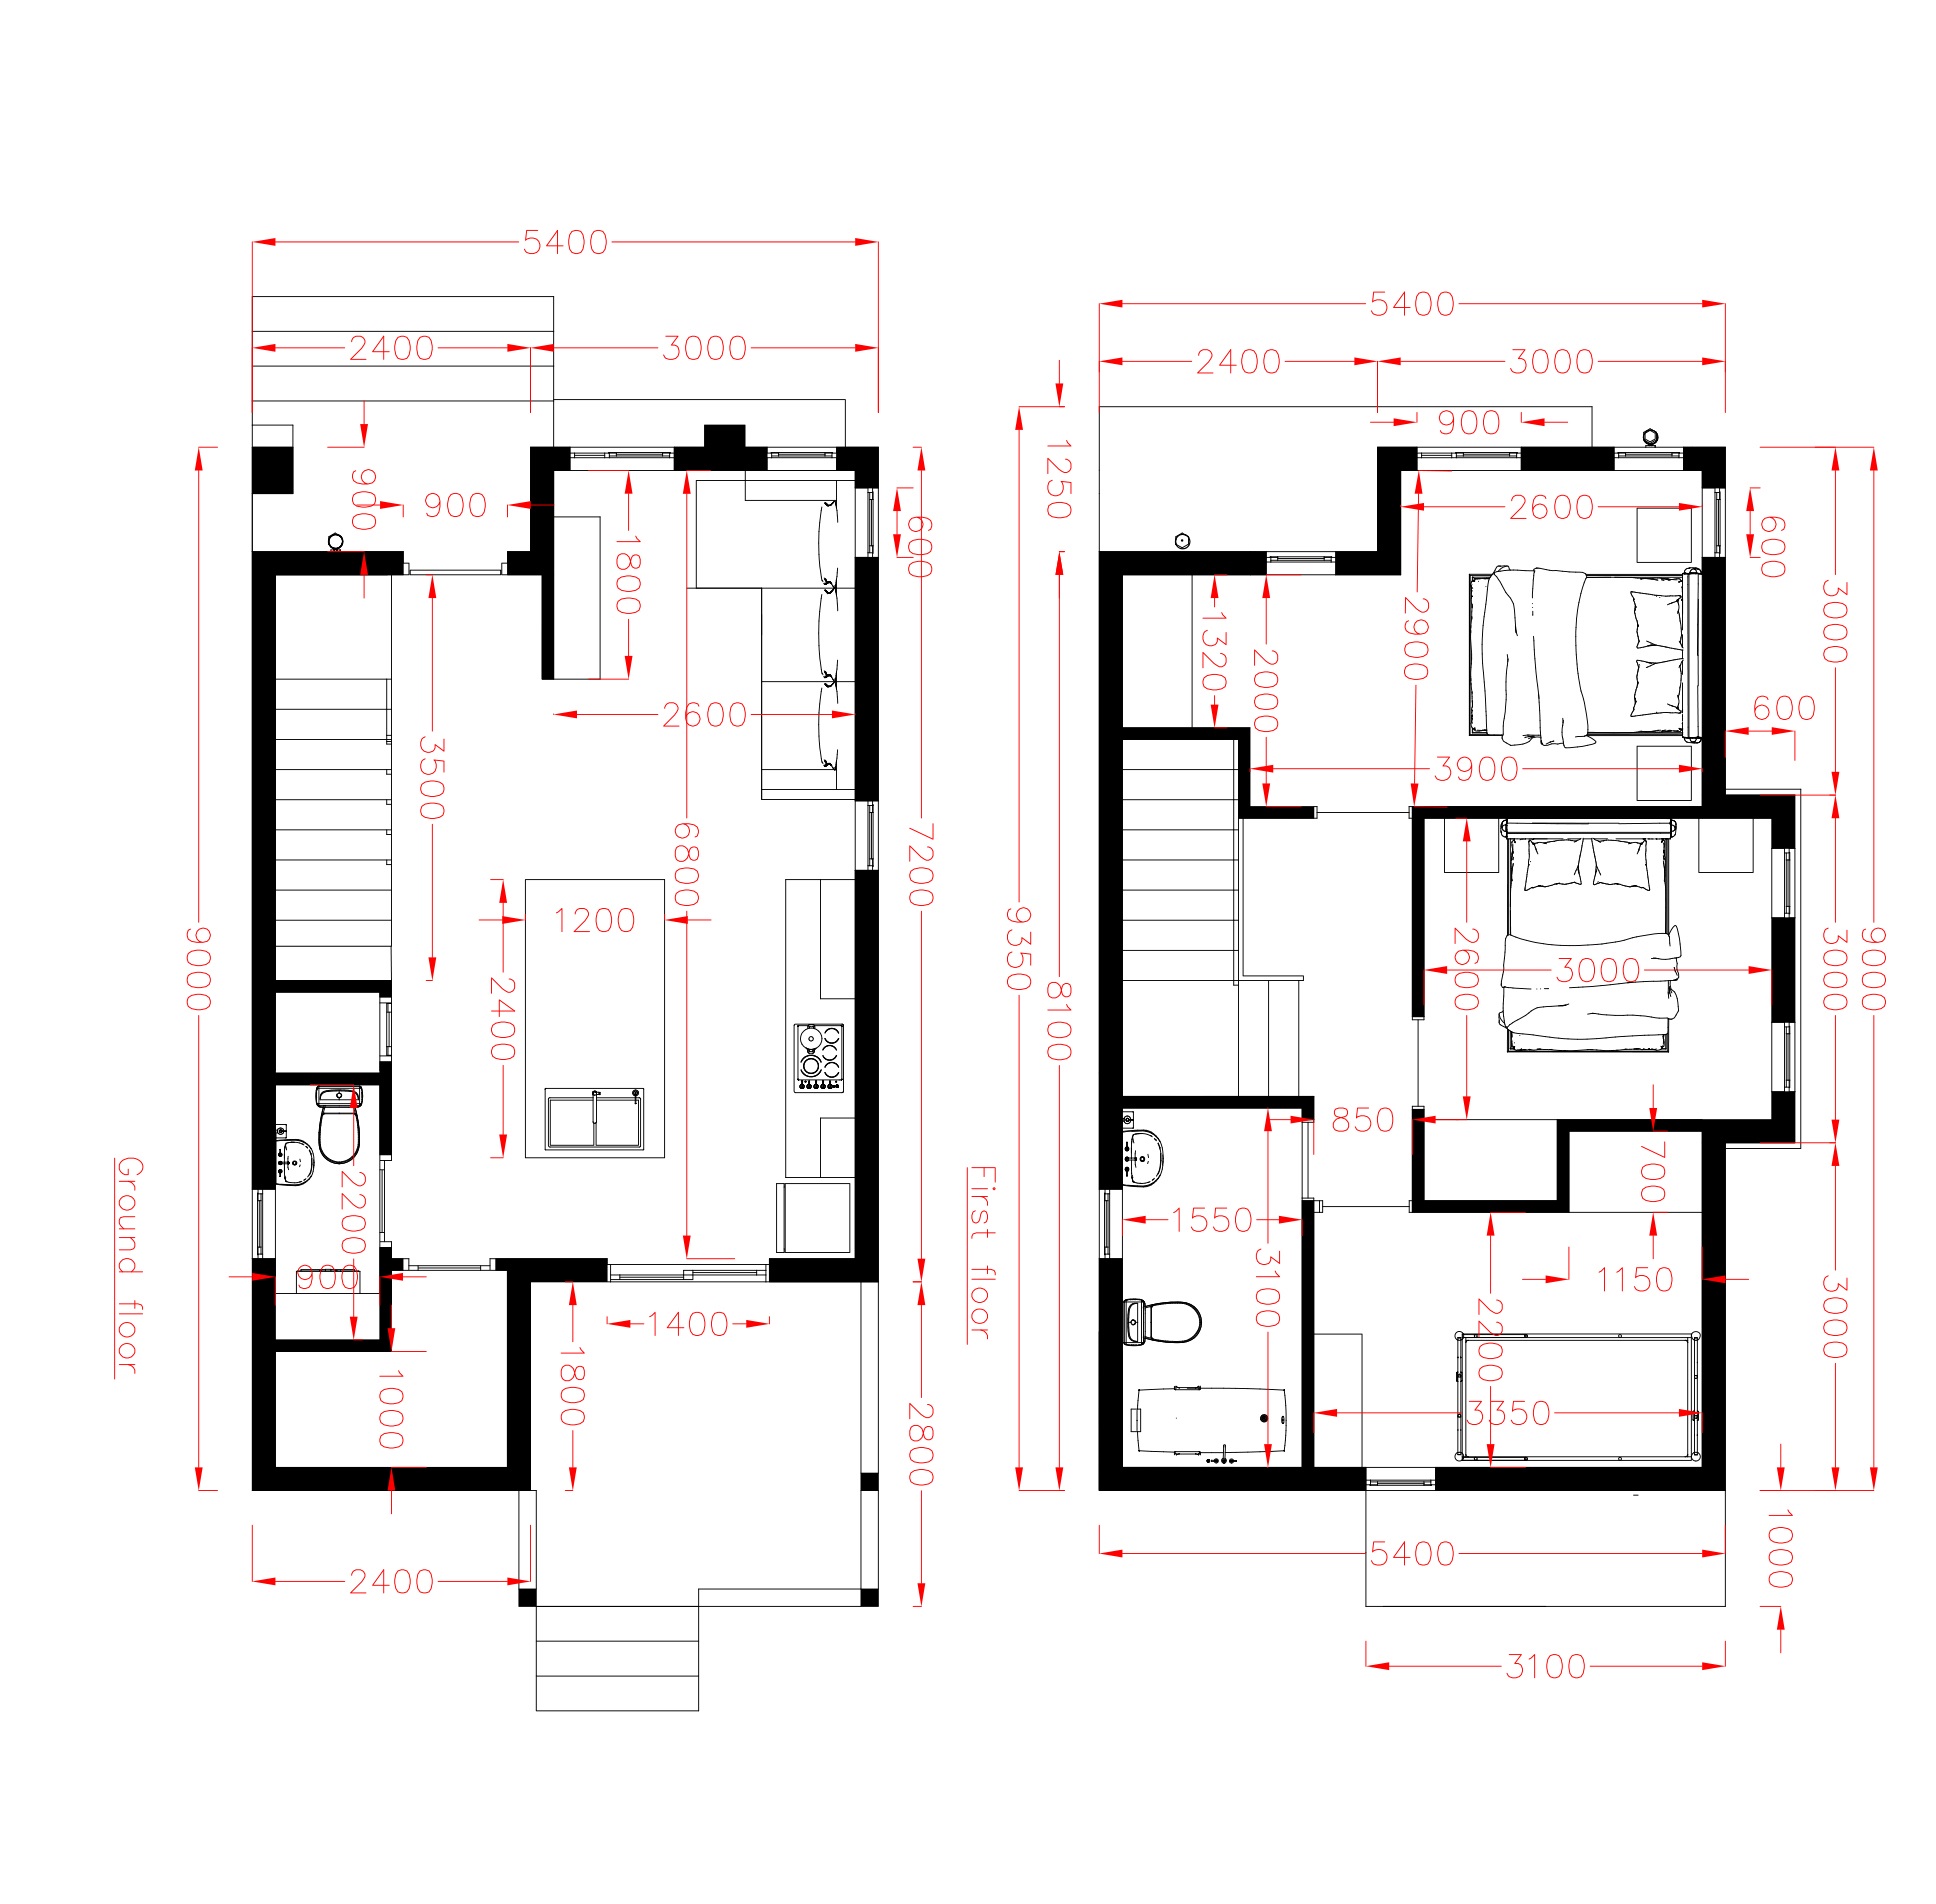 House Plans 5.4x9m with 3 Bedrooms layout floor plan